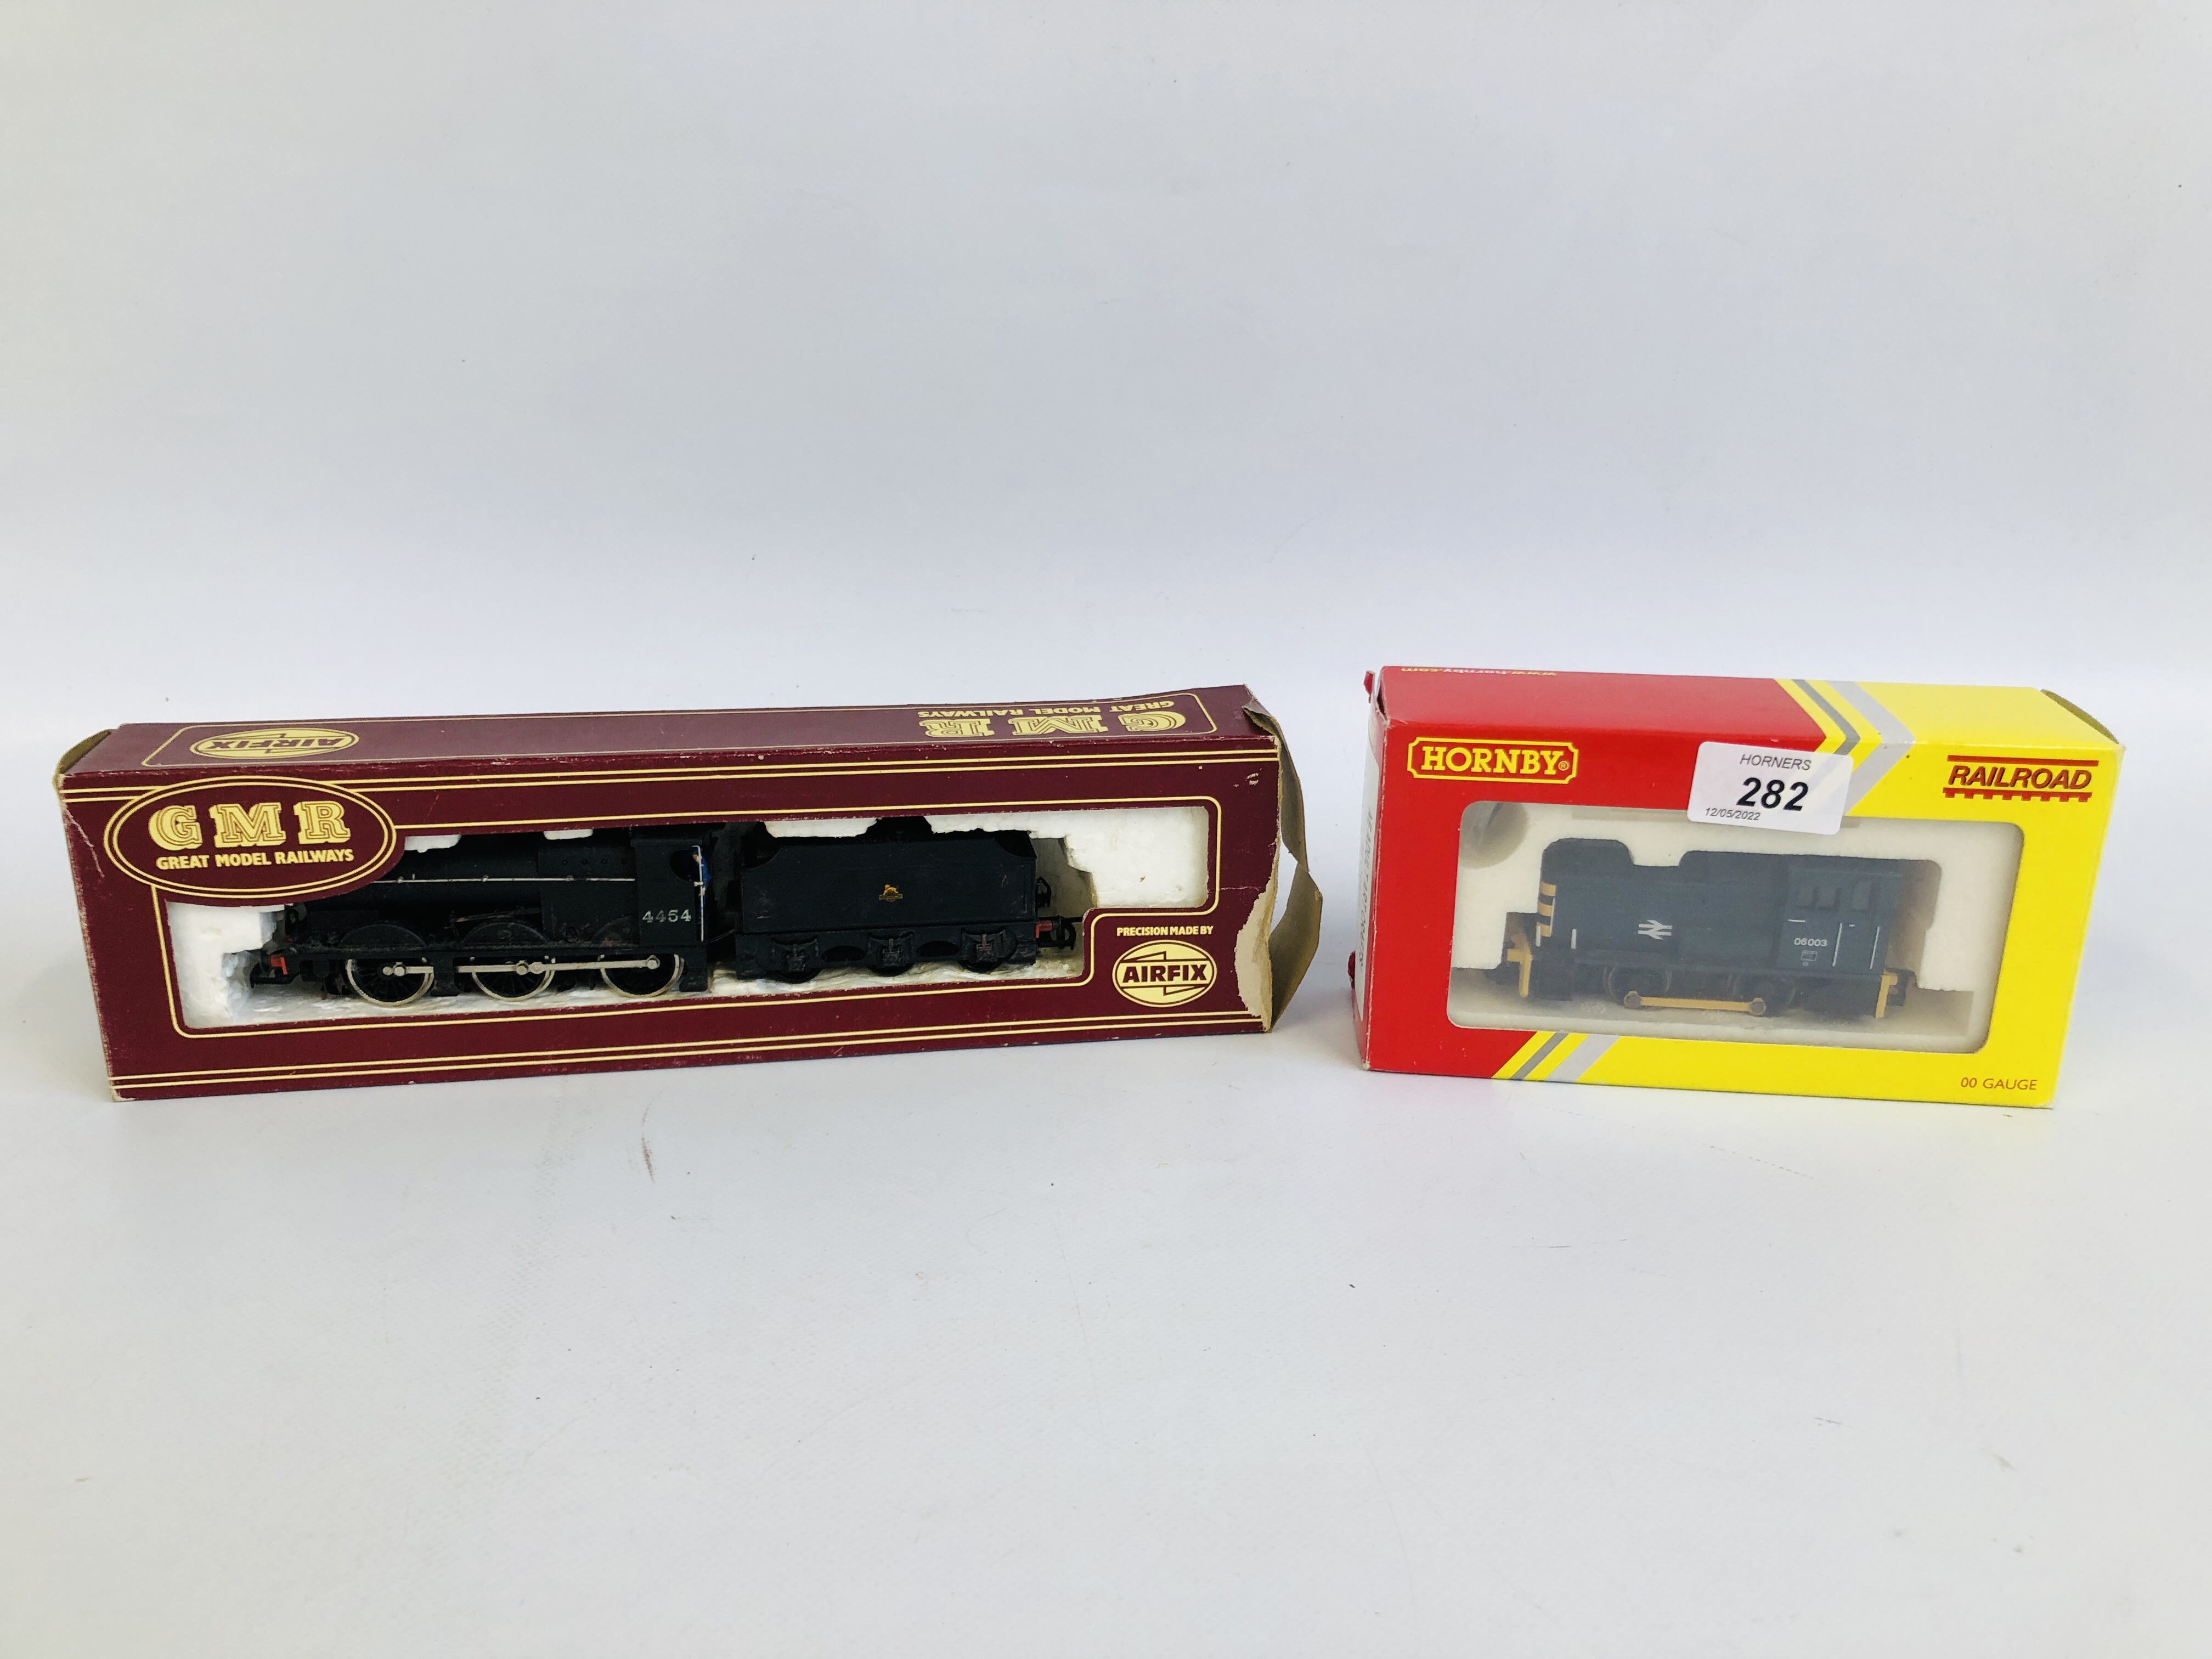 HORNBY 00 GAUGE 06003 LOCOMOTIVE BOXED AND AIRFIX GMR 4454 LOCOMOTIVE AND TENDER BOXED